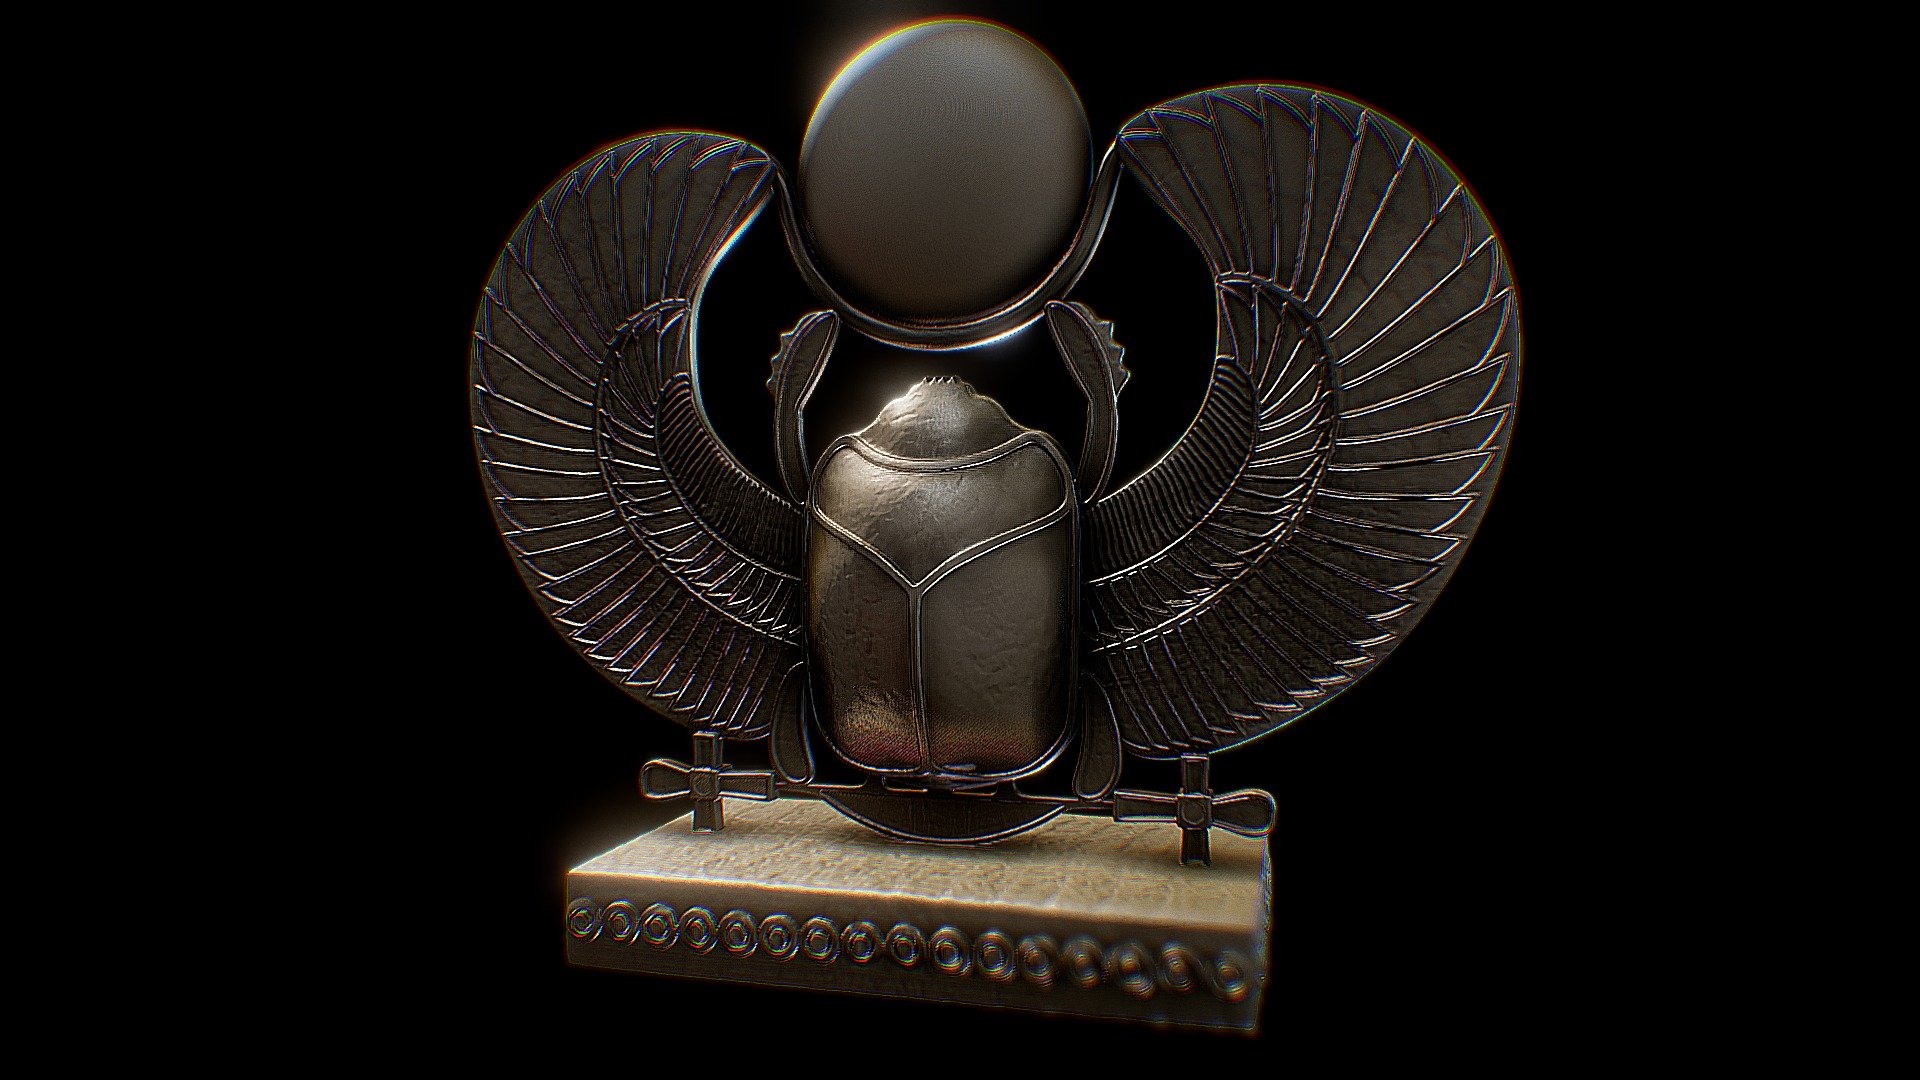 One of my (High Poly) Scarabeus model from Dark side of Anubis (VR hyper reality)

Trailer:
https://www.youtube.com/watch?v=A4hXisMo11o

(The models are owned by VR Vidámpark)

It was made in Zbrush. (Not scanned model.) - DsoA - Winged Scarabeus v2 - 3D model by ber.vendel.design 3d model